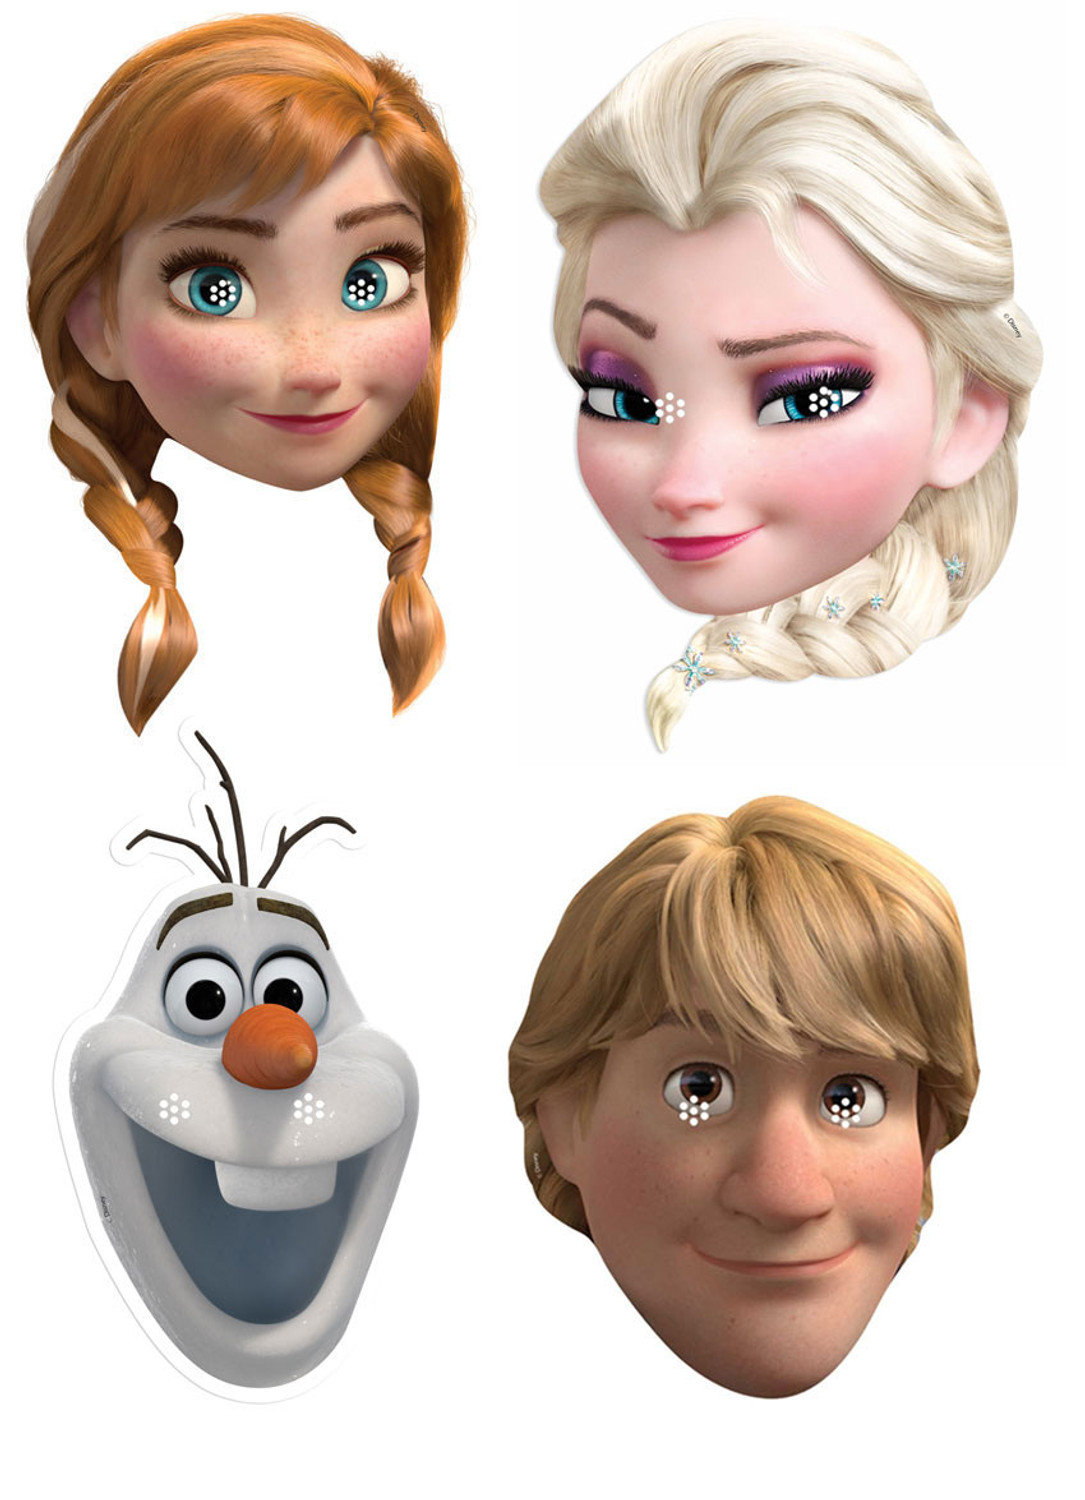 Disney's Frozen Variety Party Face Mask Pack of 4 (Anna, Elsa, Olaf and  Kristoff) Available now at Starstills.com